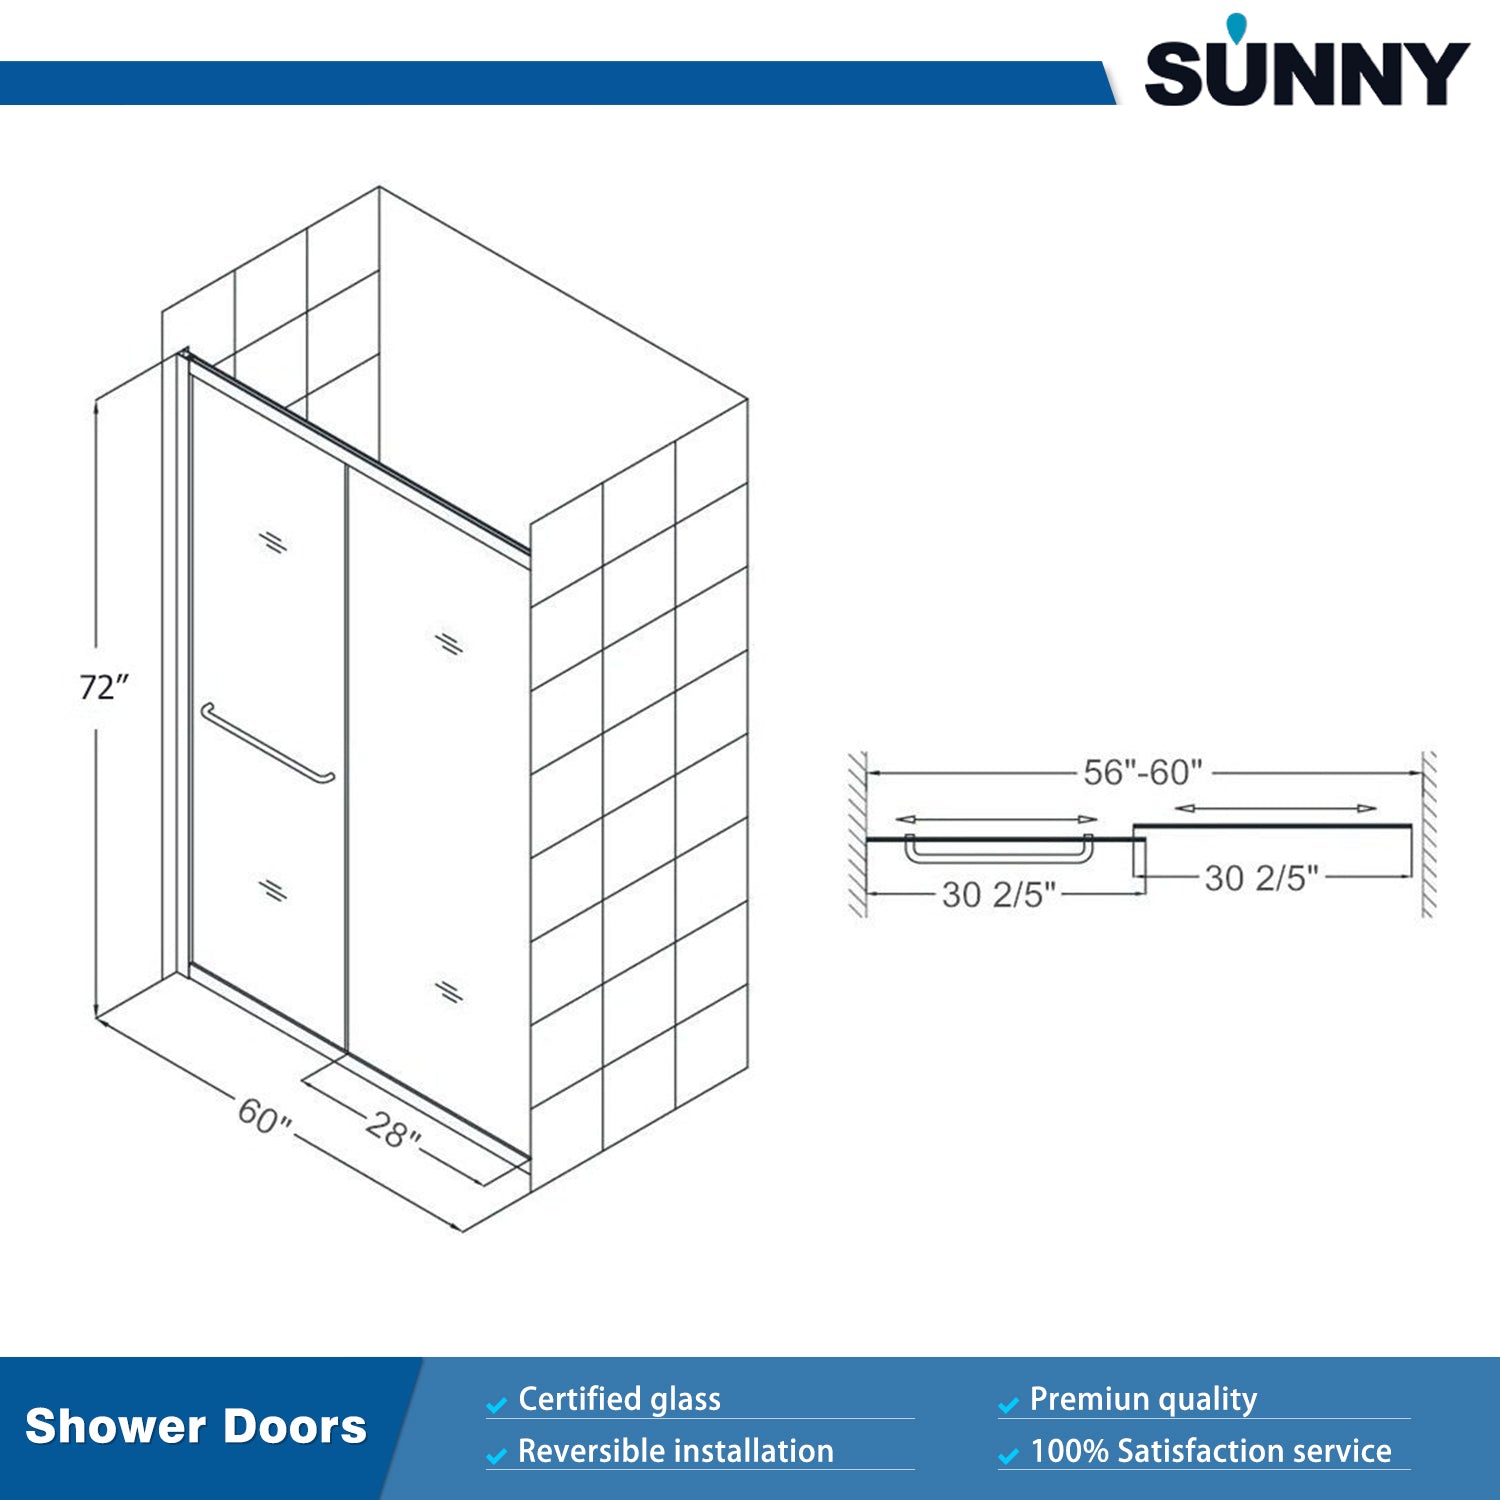 SUNNY SHOWER 60 in. W x 72 in. H Frosted Brushed Nickel Finish Double Sliding Shower Doors Dimensions